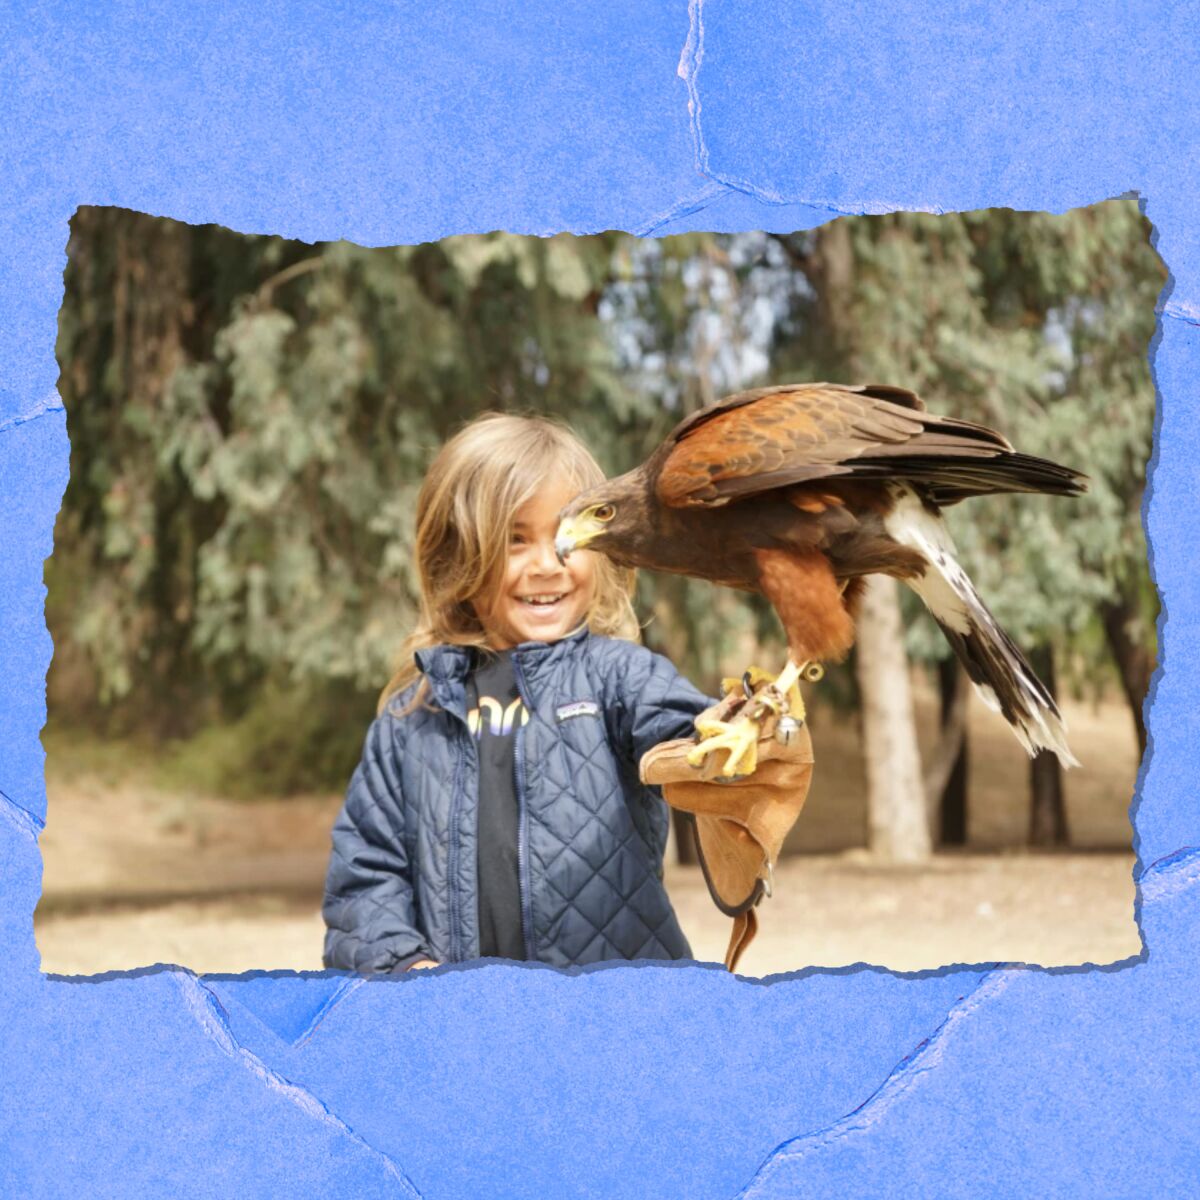 Ready for an animal encounter? Hawk on Hand brings you oh-so close.